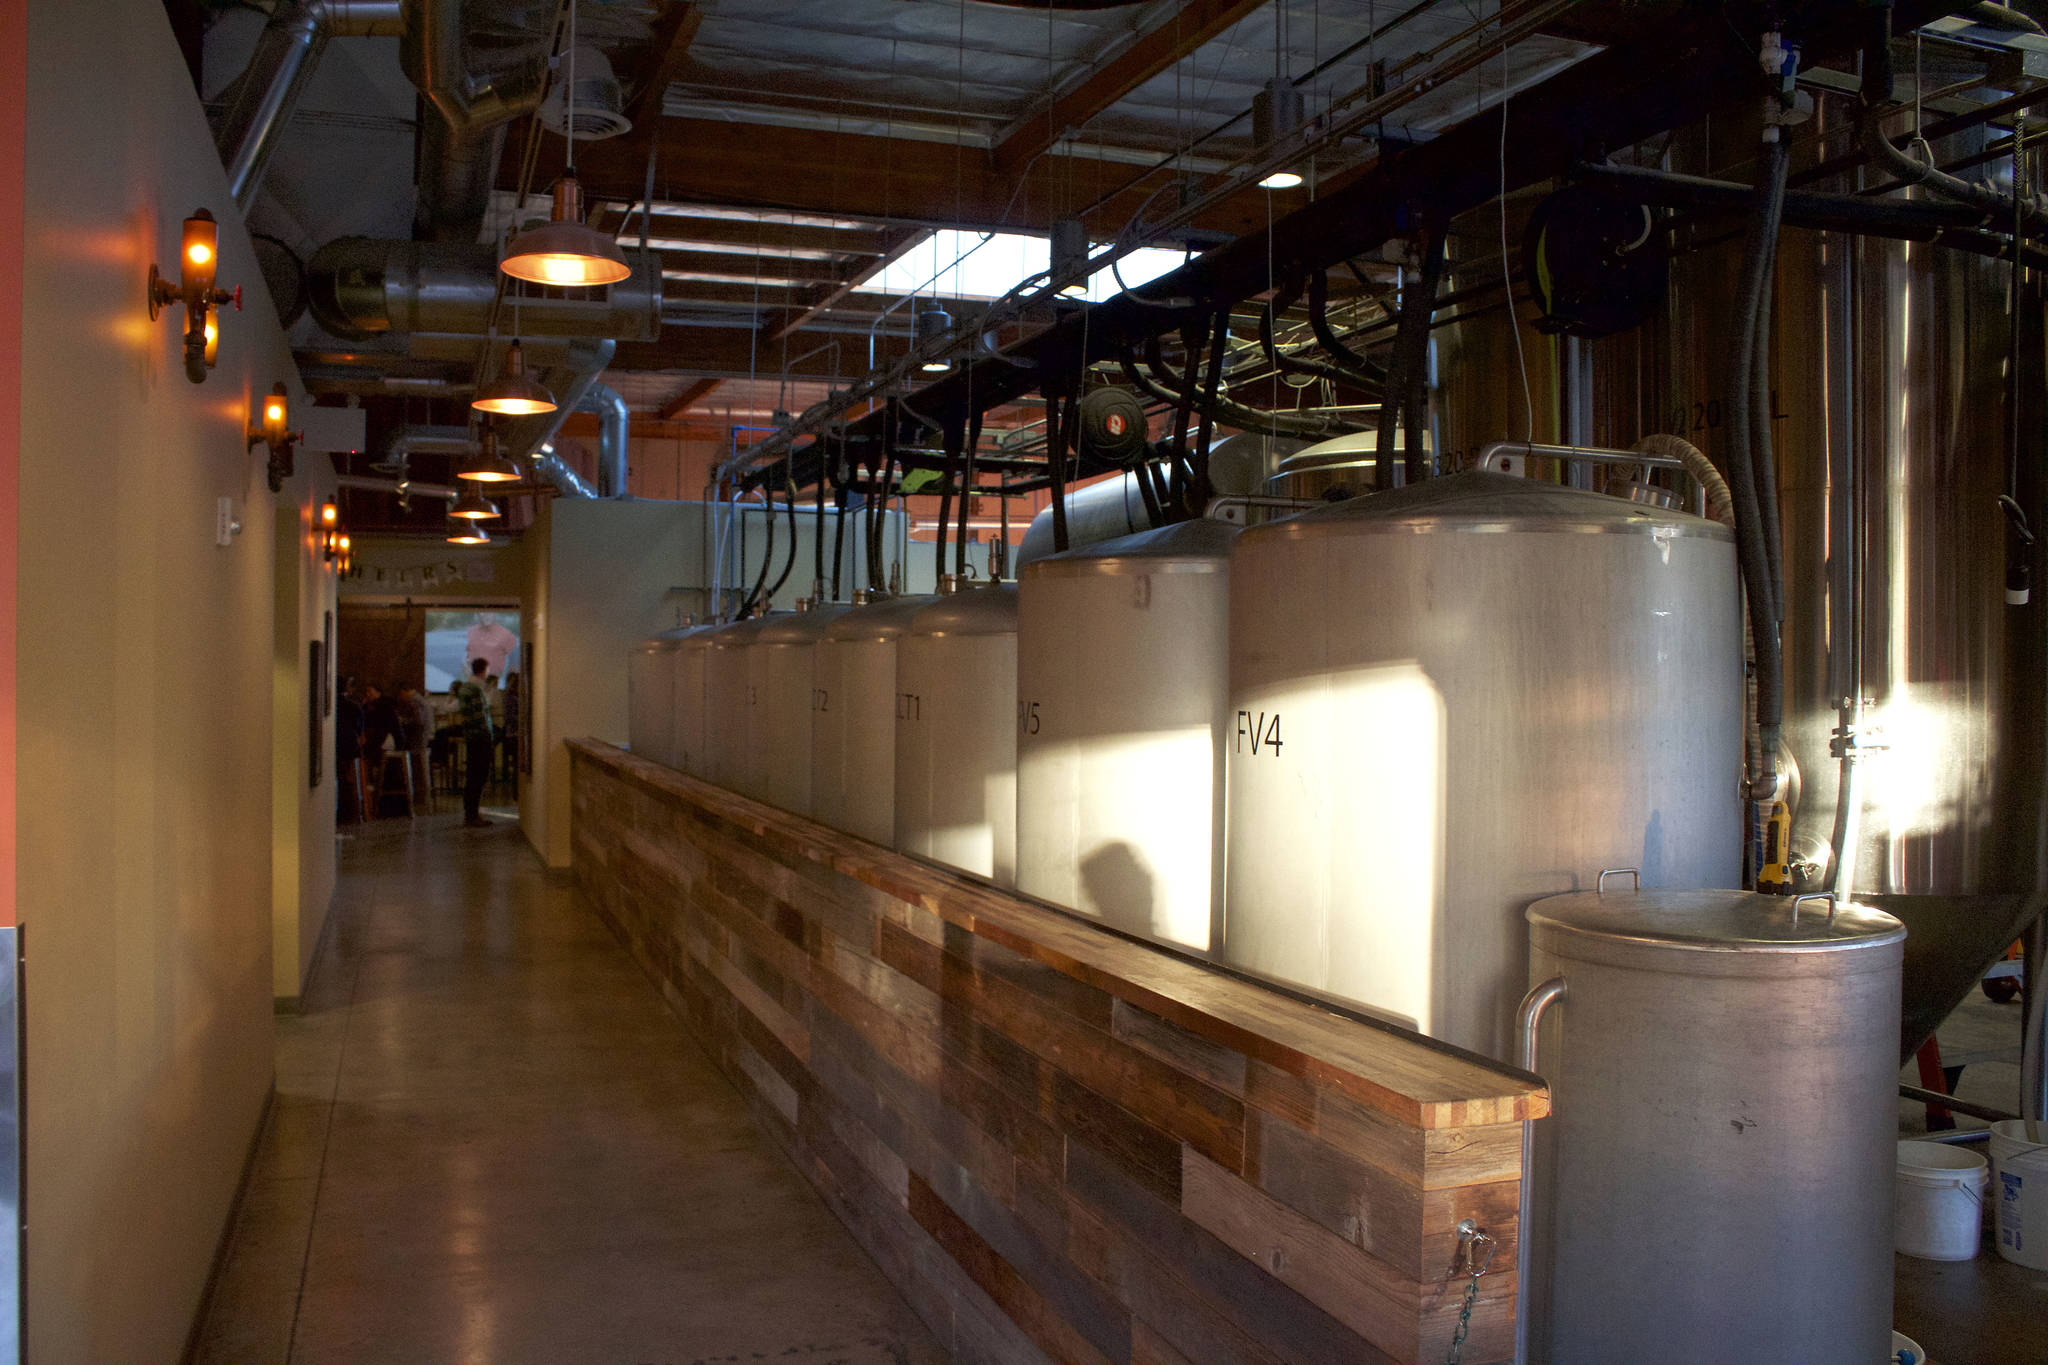 Chainline patrons walk down a line of tanks and brewing equipment before they enter the tap room at the back of the space. Kailan Manandic/staff photo